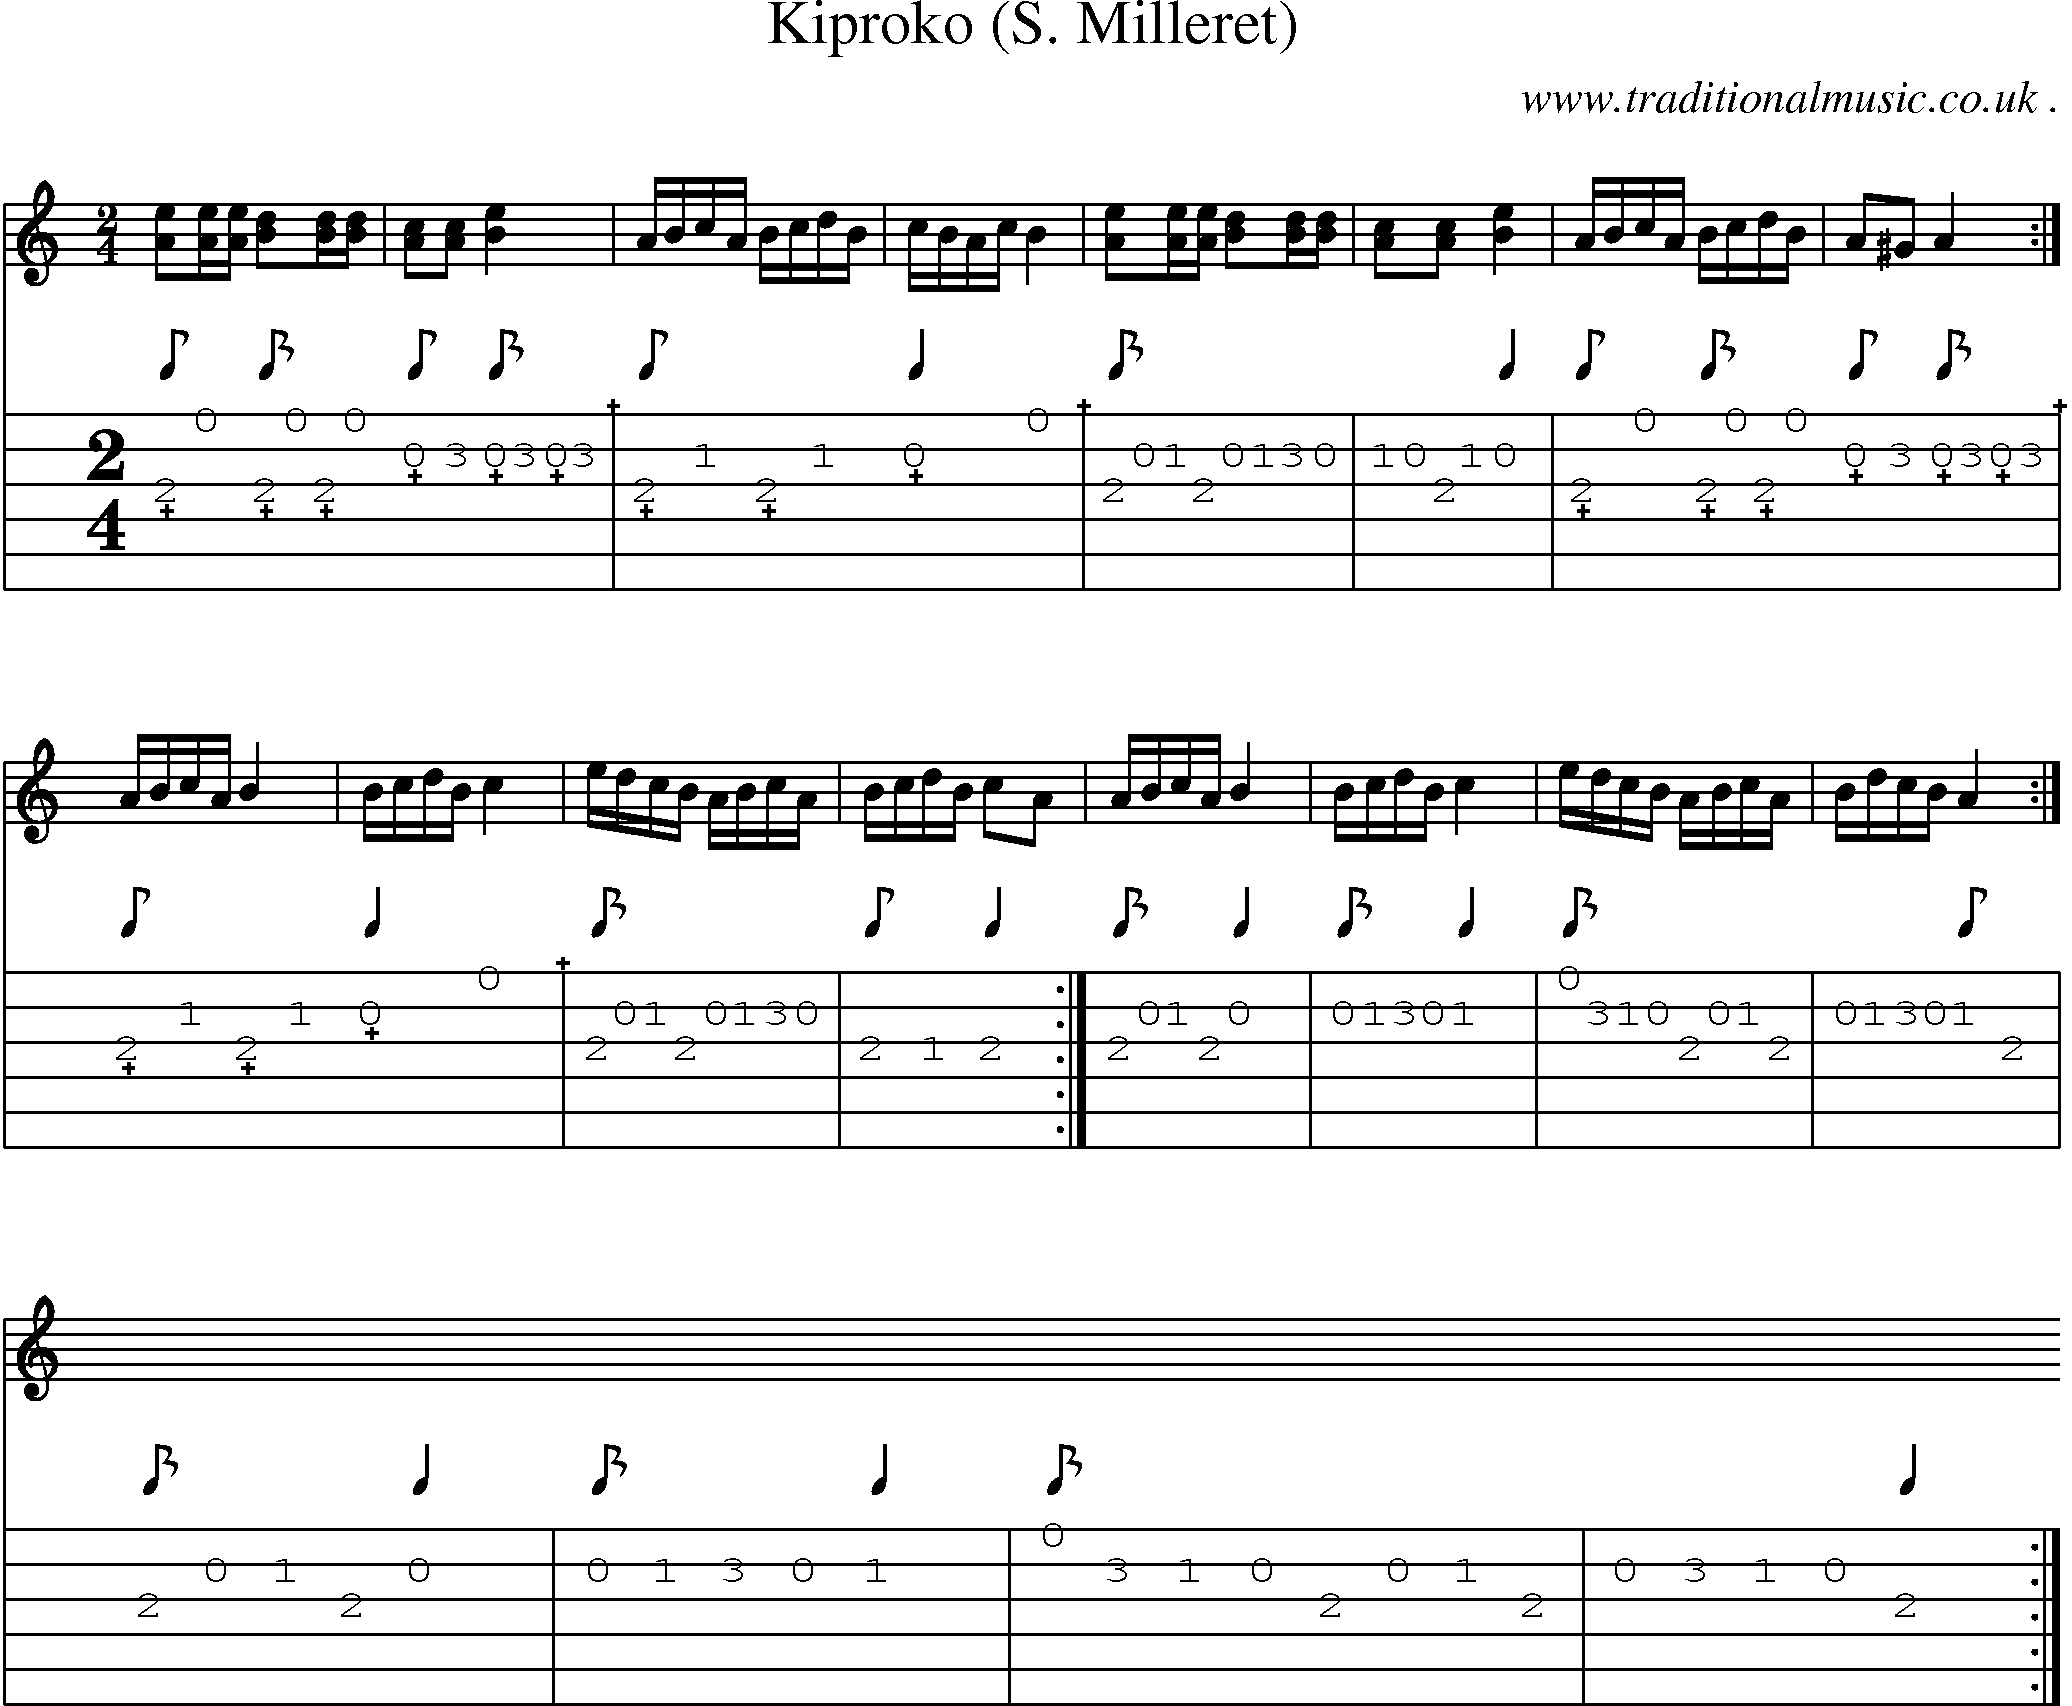 Sheet-Music and Guitar Tabs for Kiproko (s Milleret)